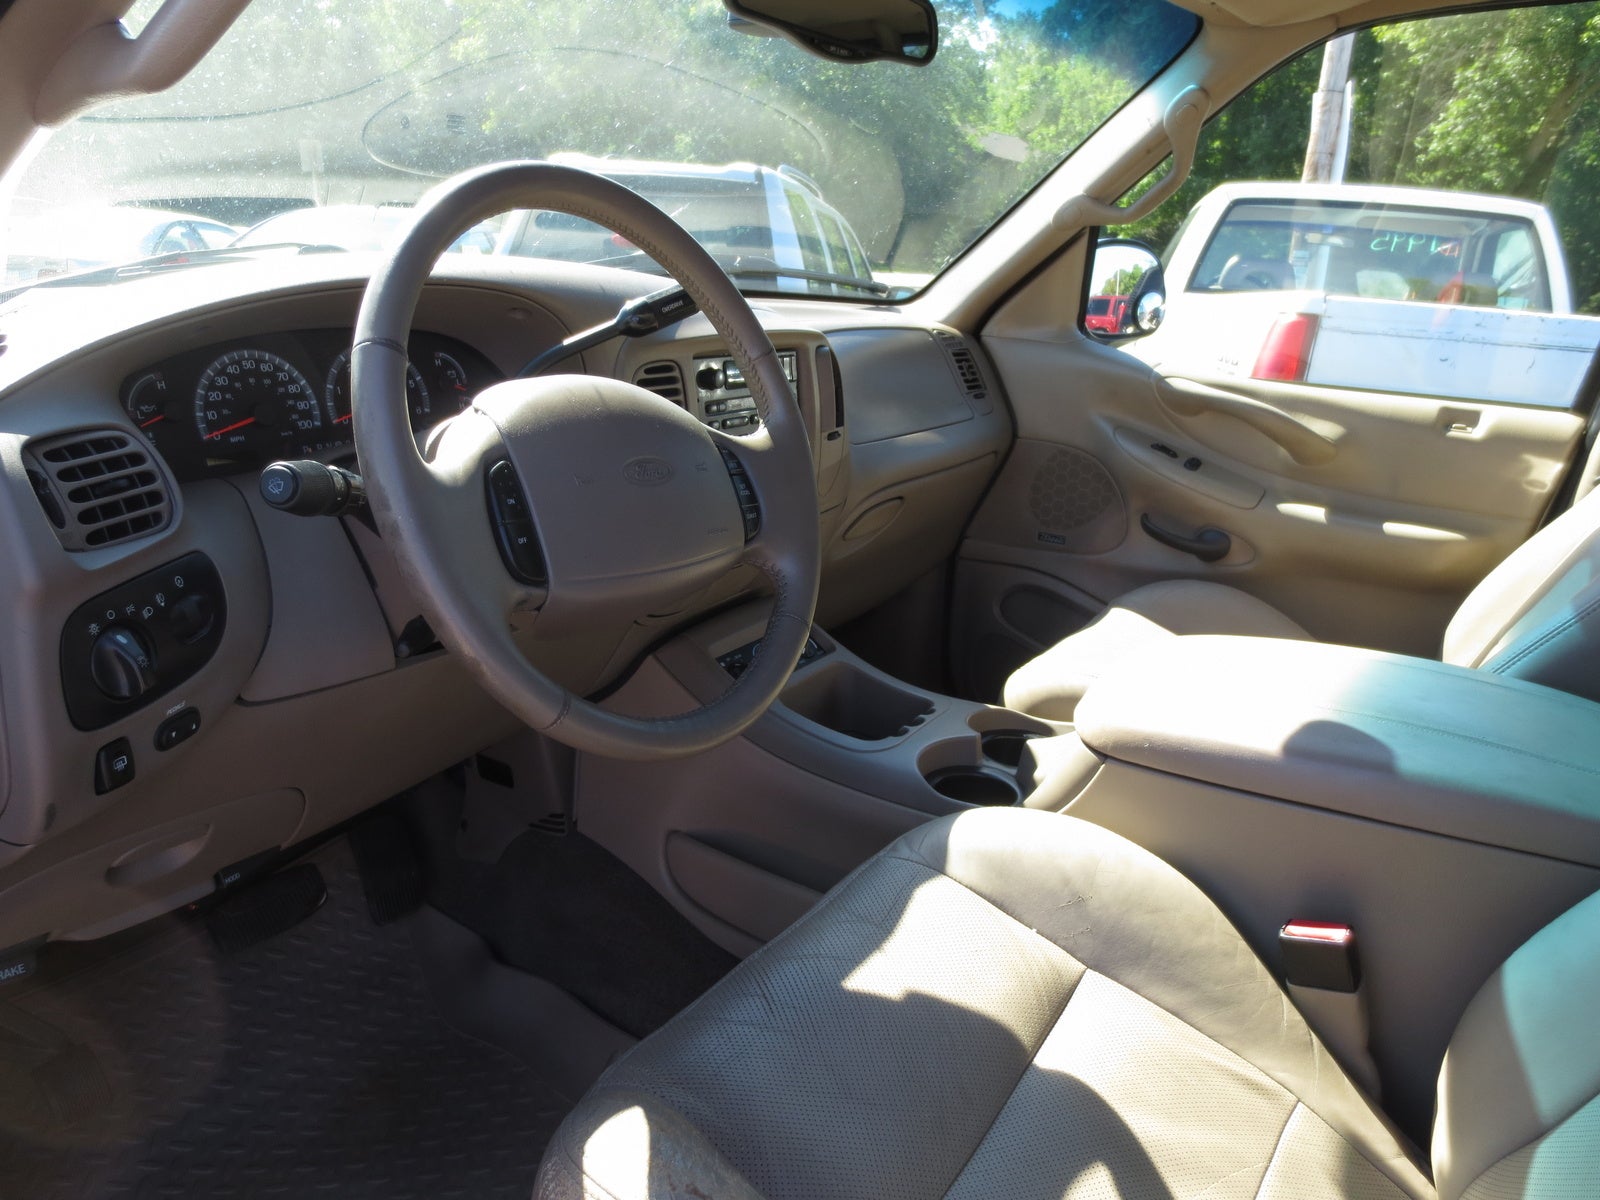 2001 Ford expedition interior dimensions #10